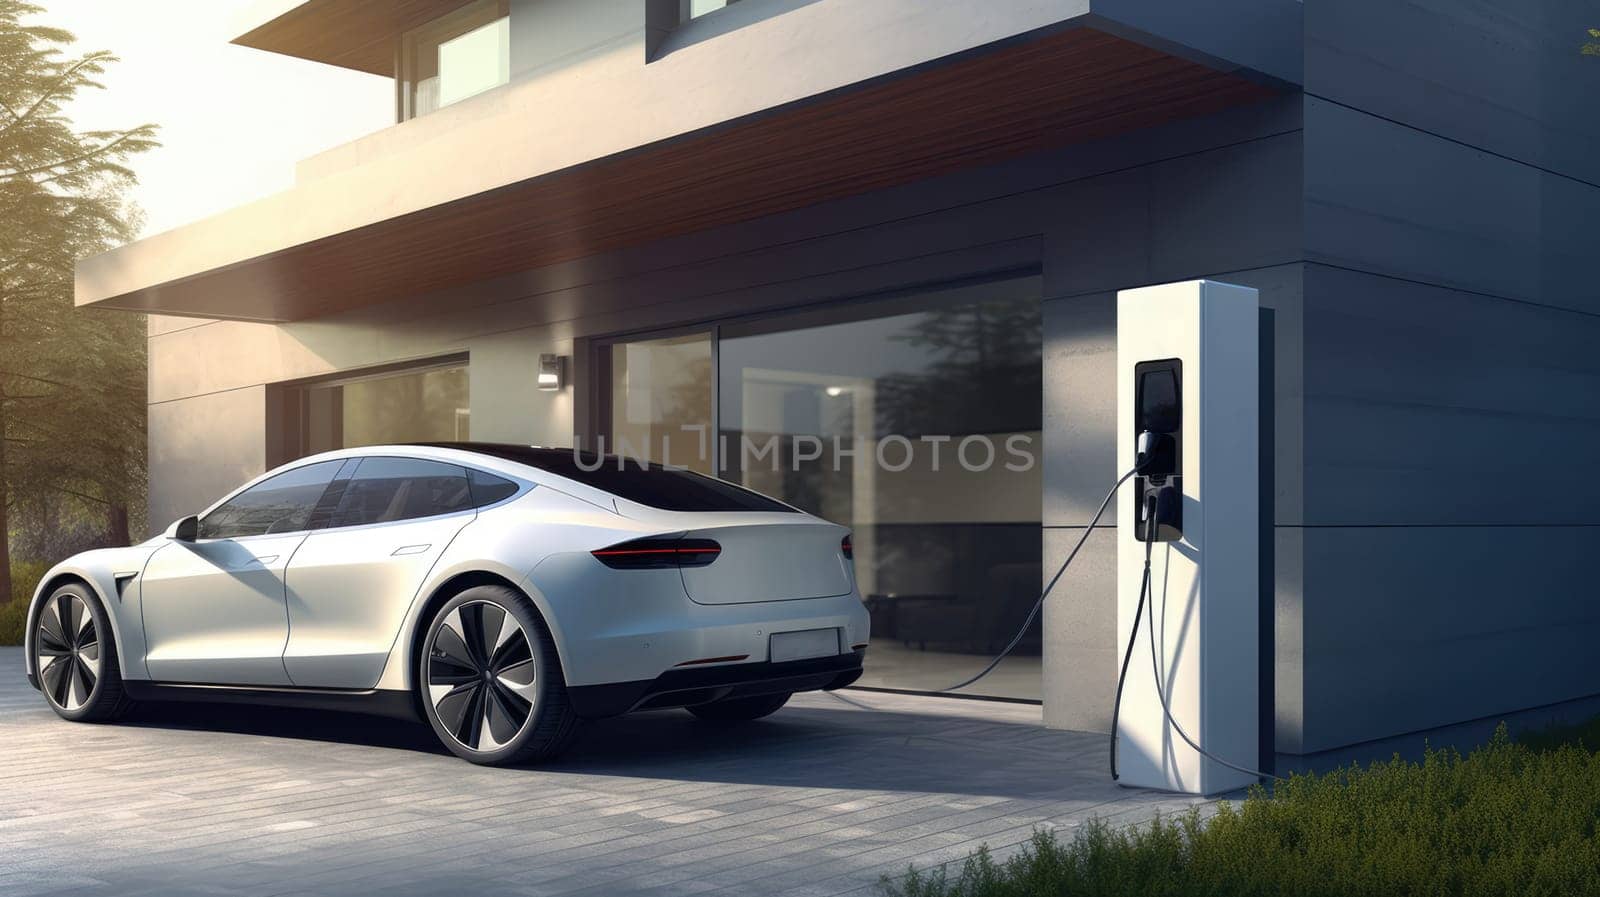 Generic electric vehicle EV hybrid car is being charged from wall charger on contemporary modern residential building house by JuliaDorian